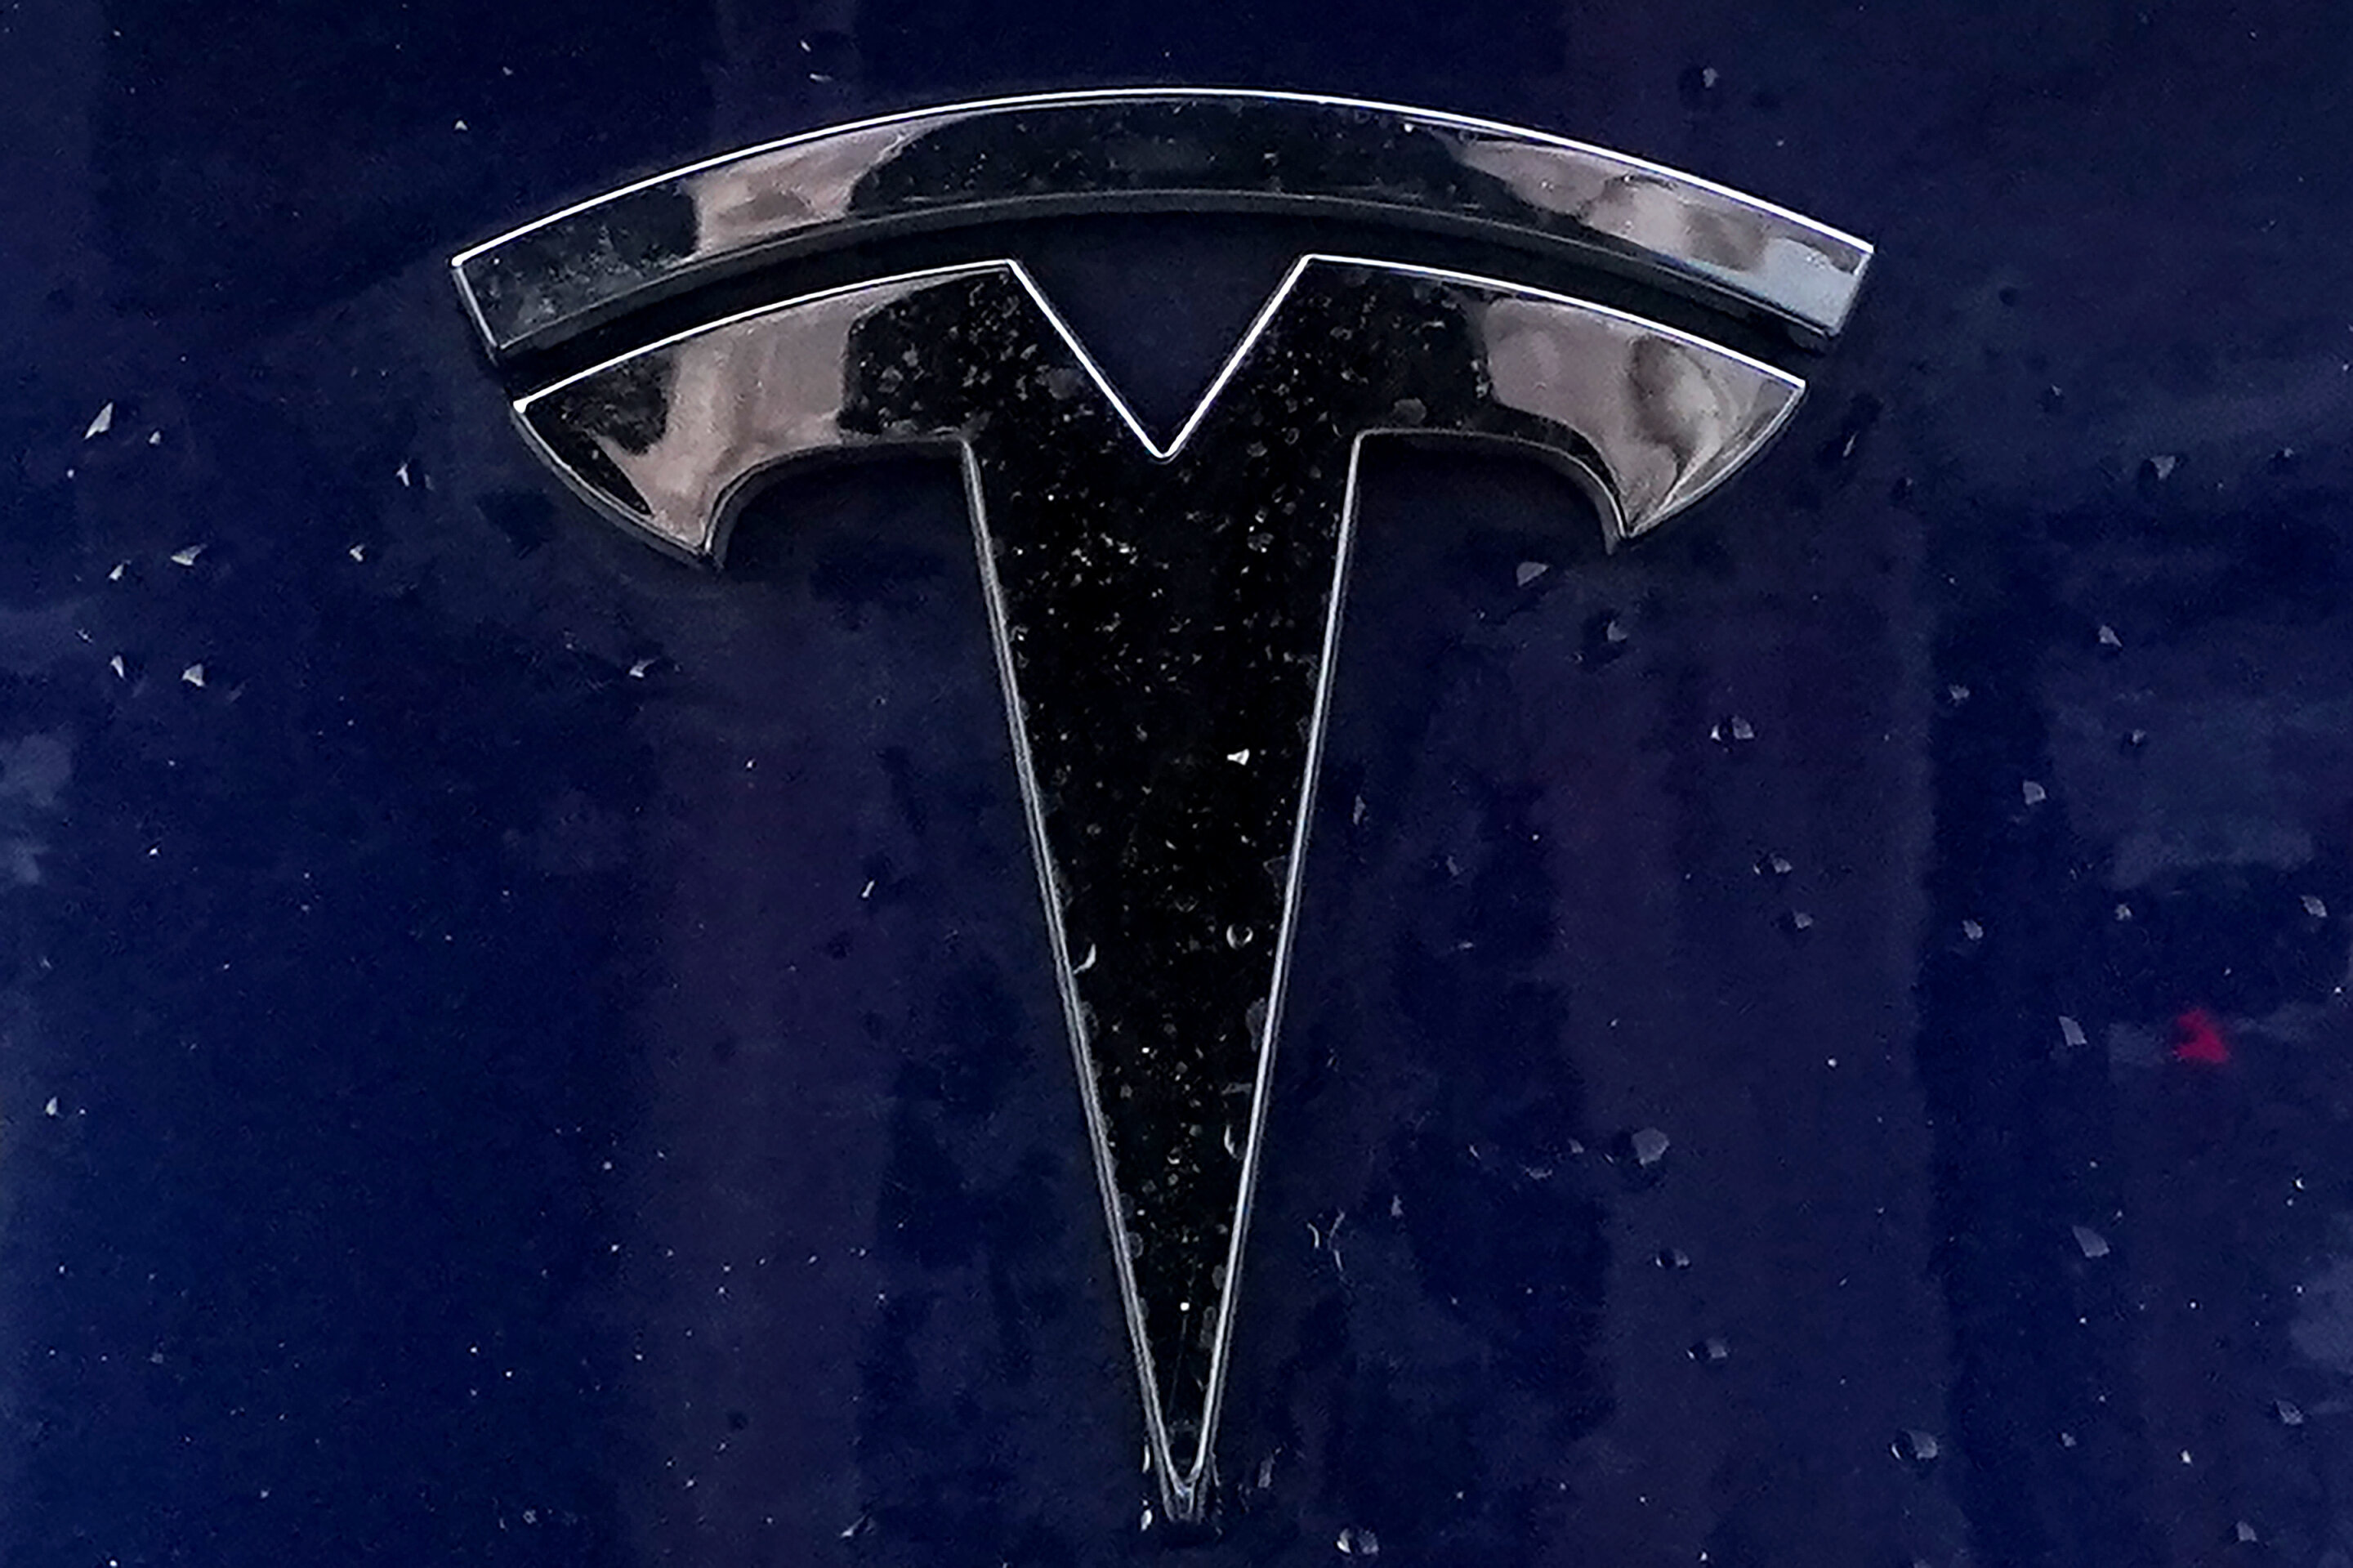 #Tesla cuts prices on all models, 3rd cut this year